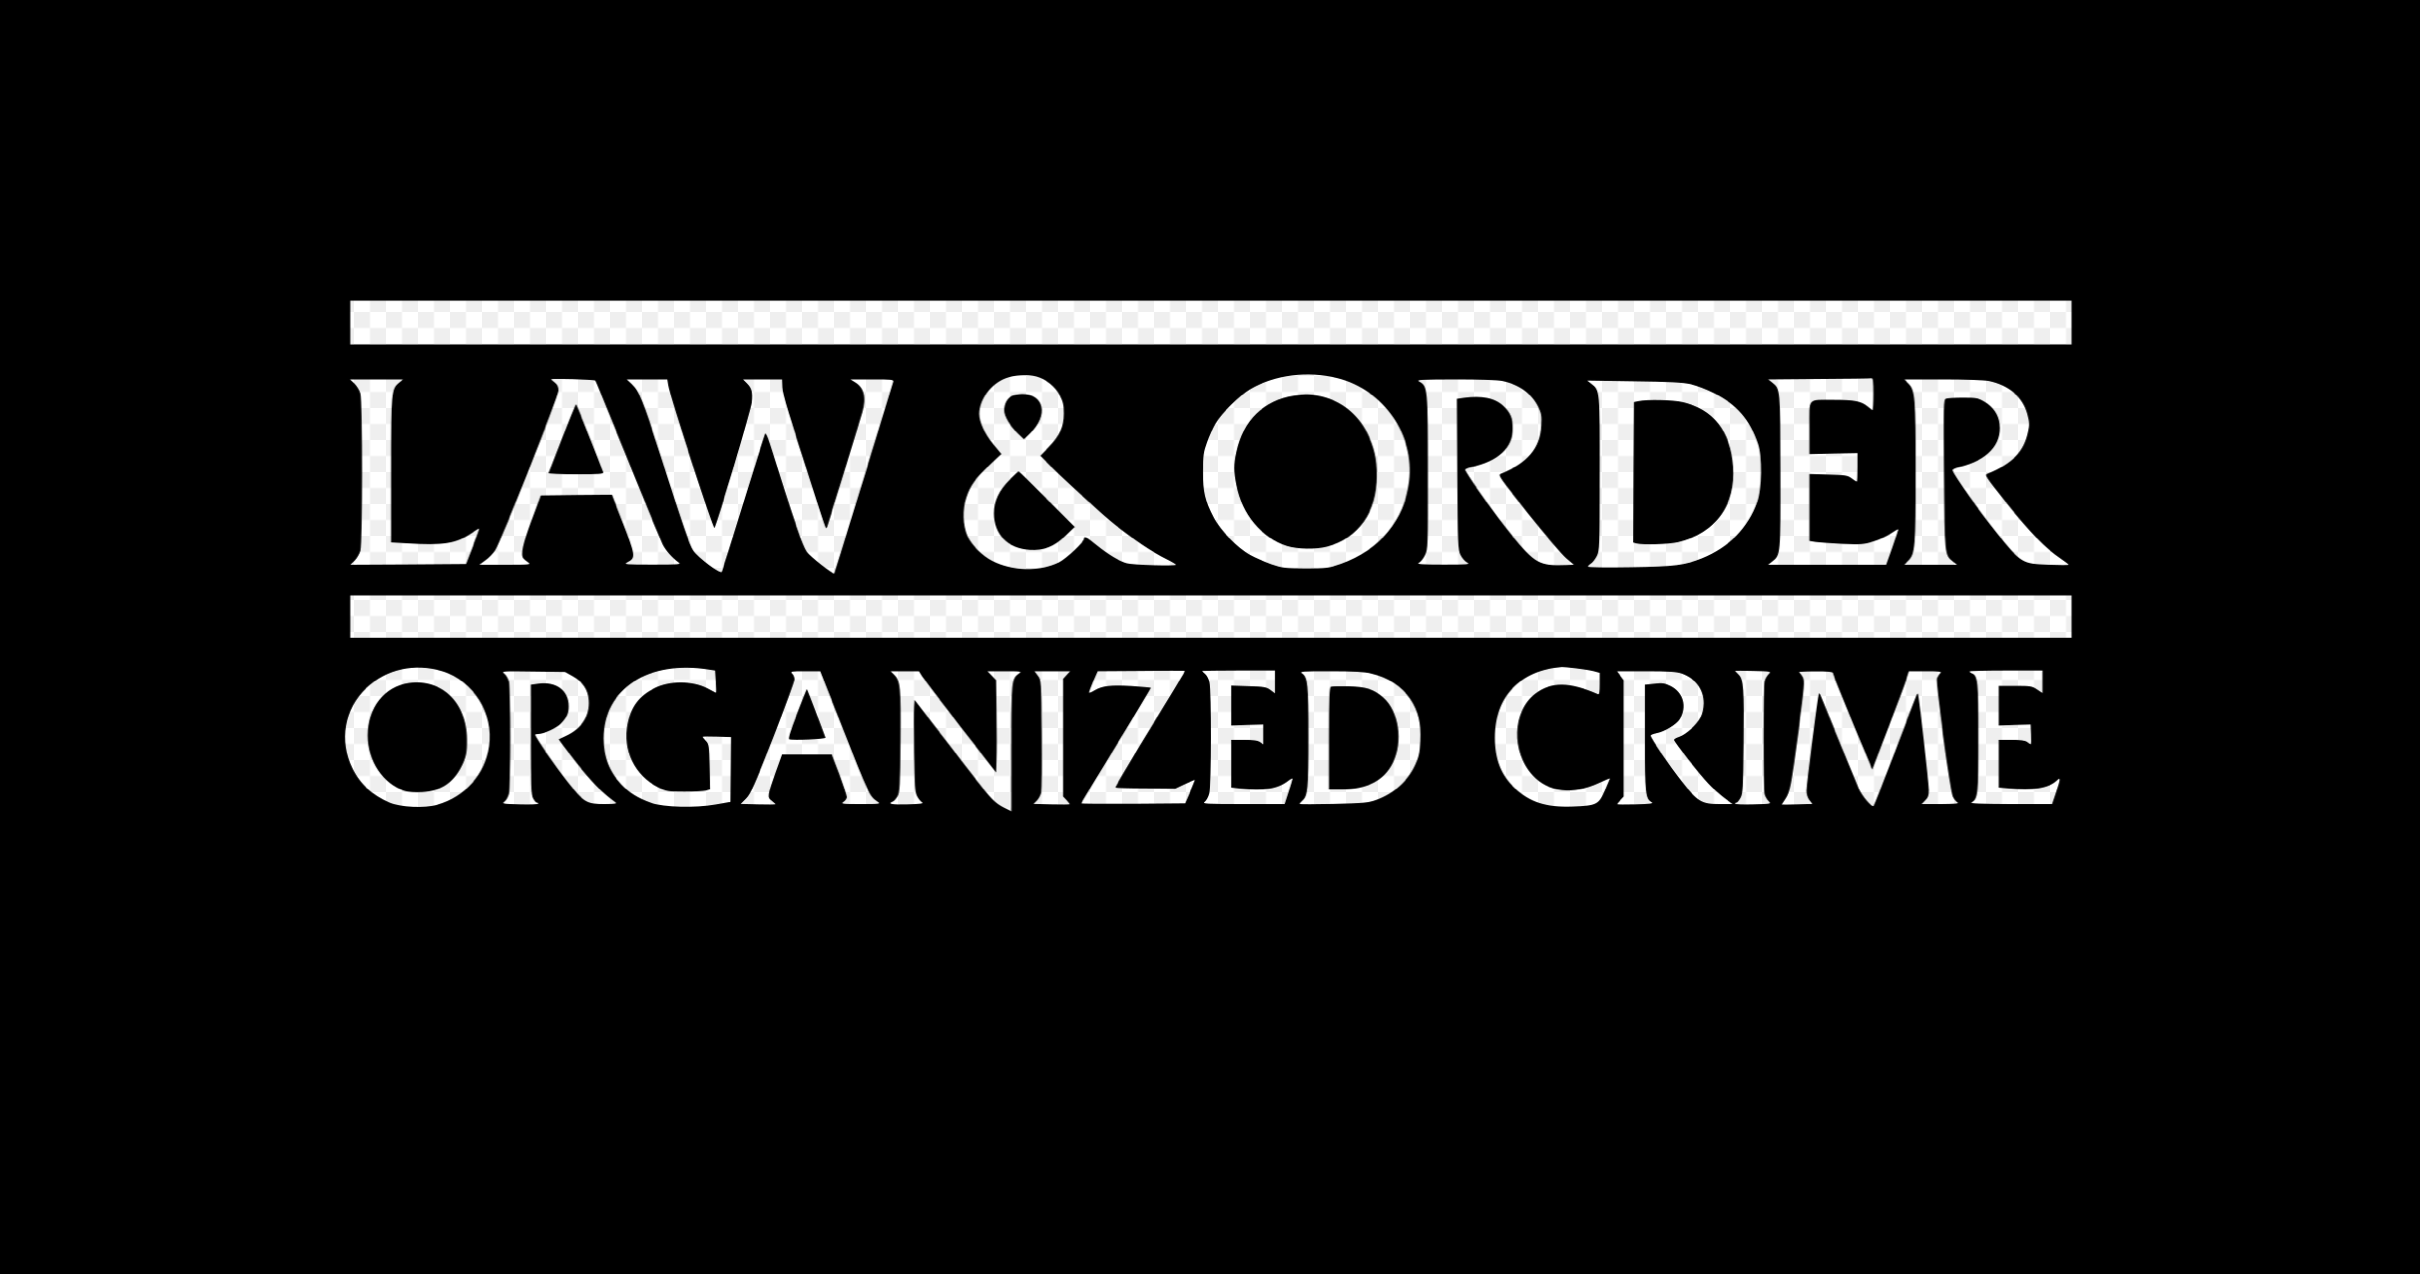 TV Media Bias Pushing More False Claims about Ghost Guns, NBC’s Law & Order: Organized Crime